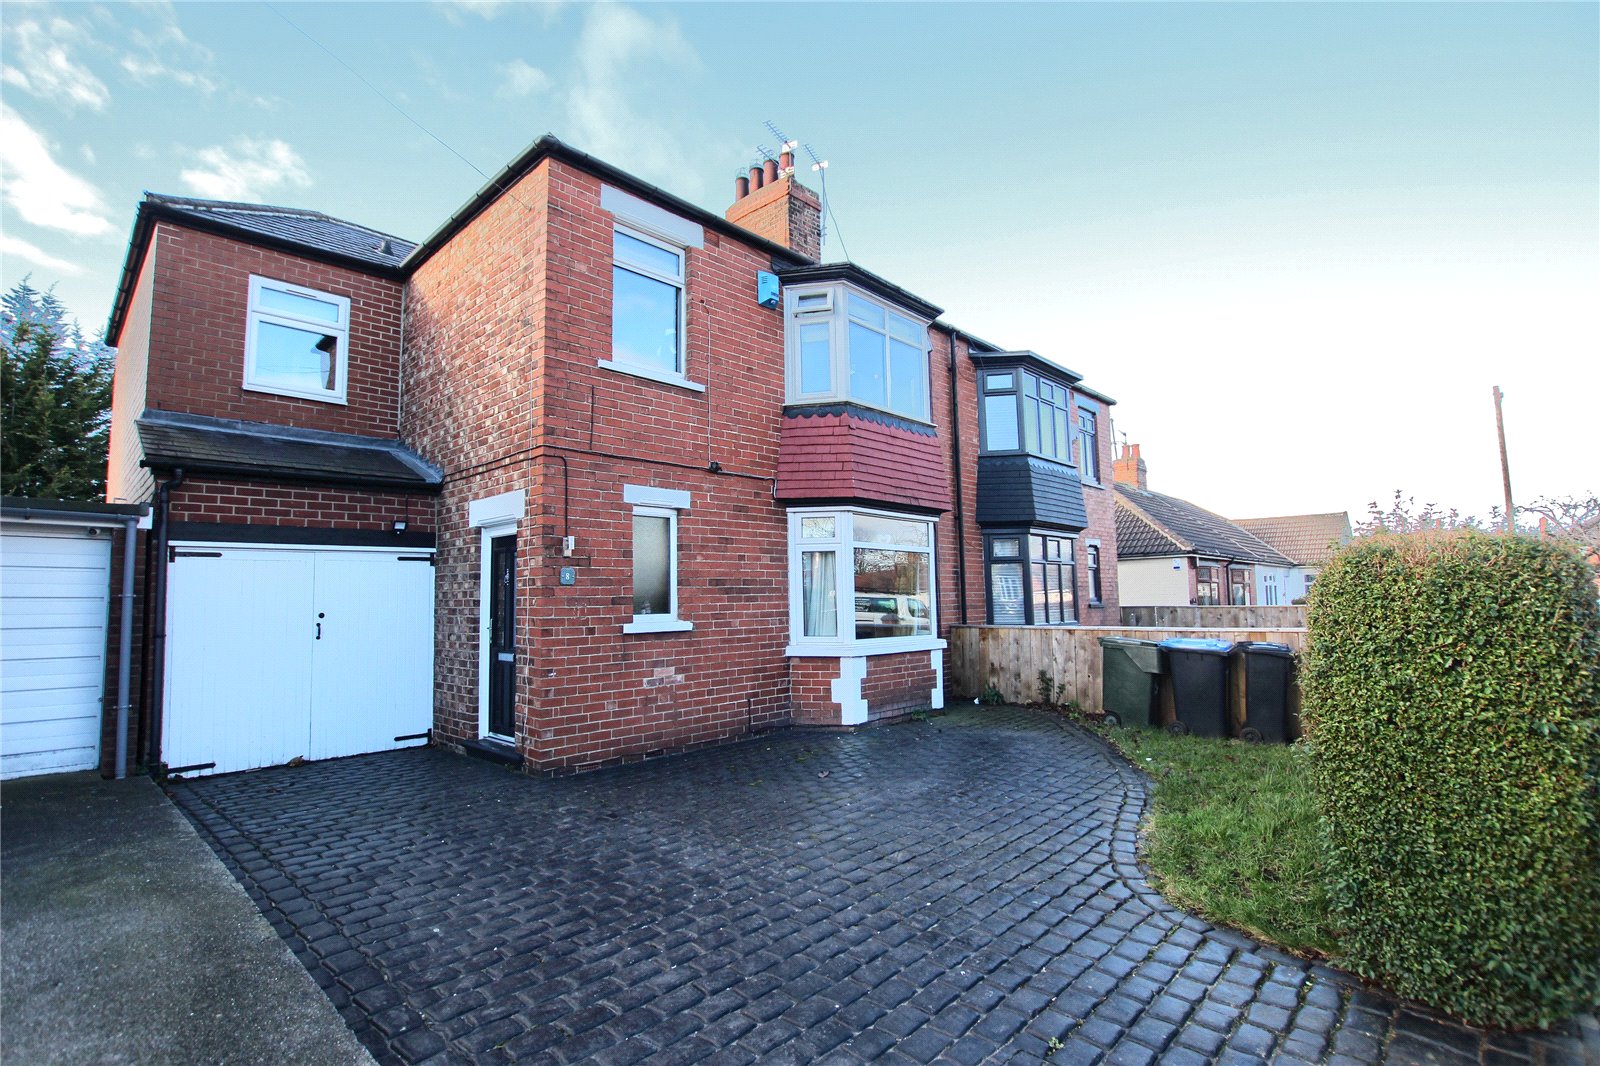 4 bed house for sale in Broadgate Road, Linthorpe  - Property Image 1